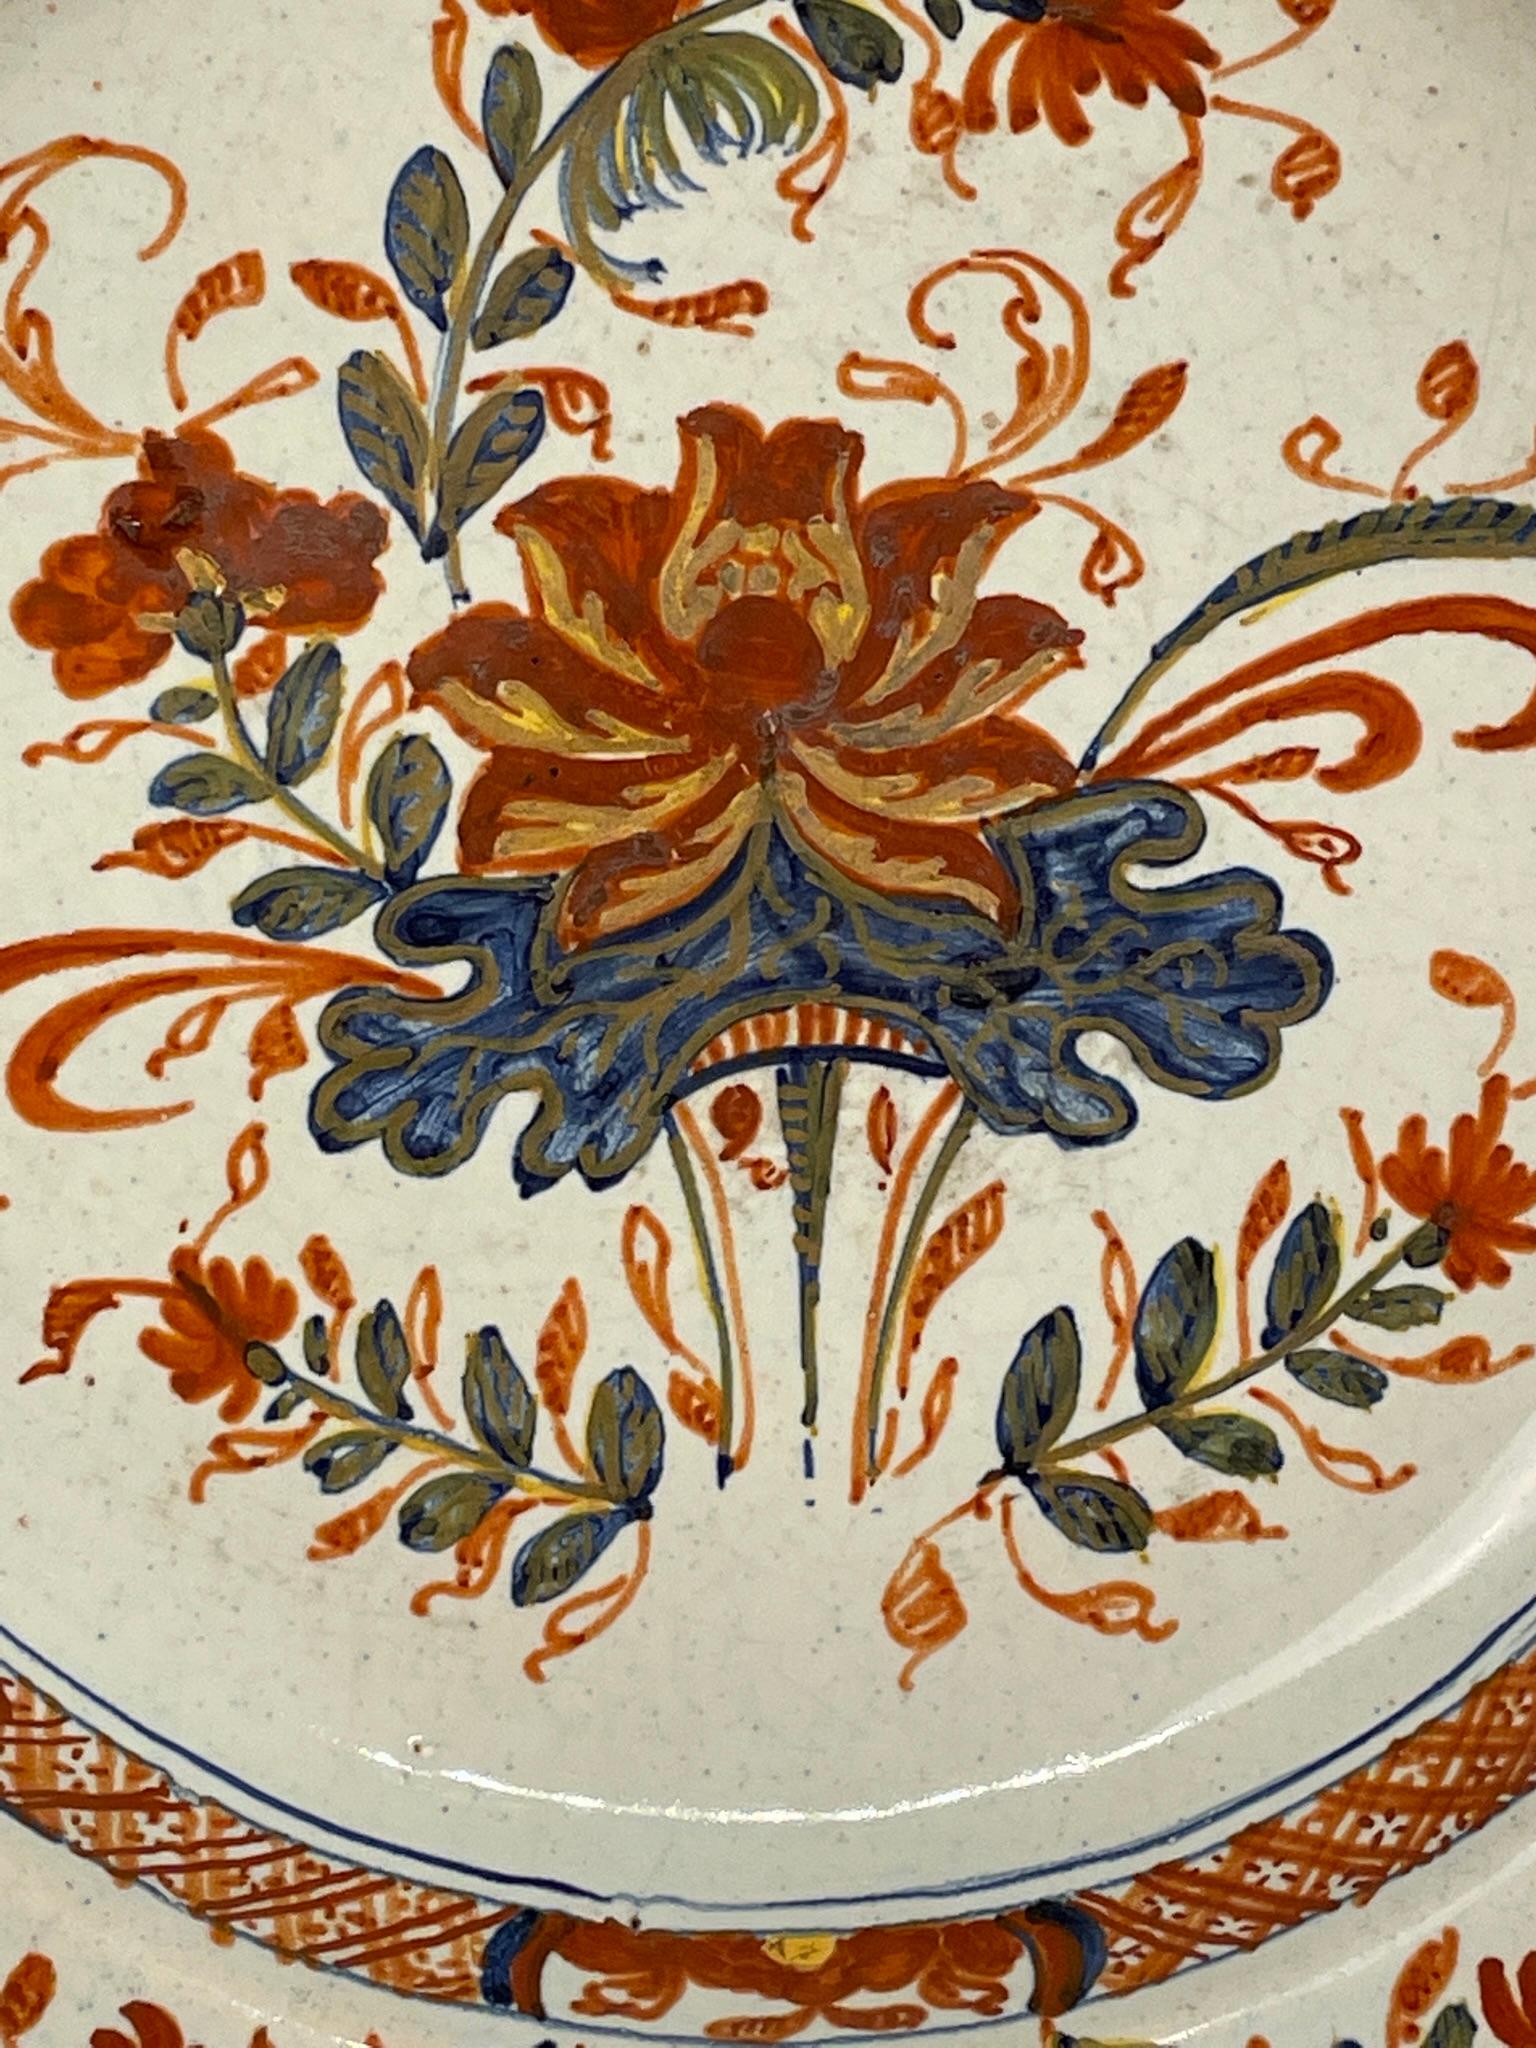 French Provincial 18th C Italian Faience Polychrome Plate For Sale